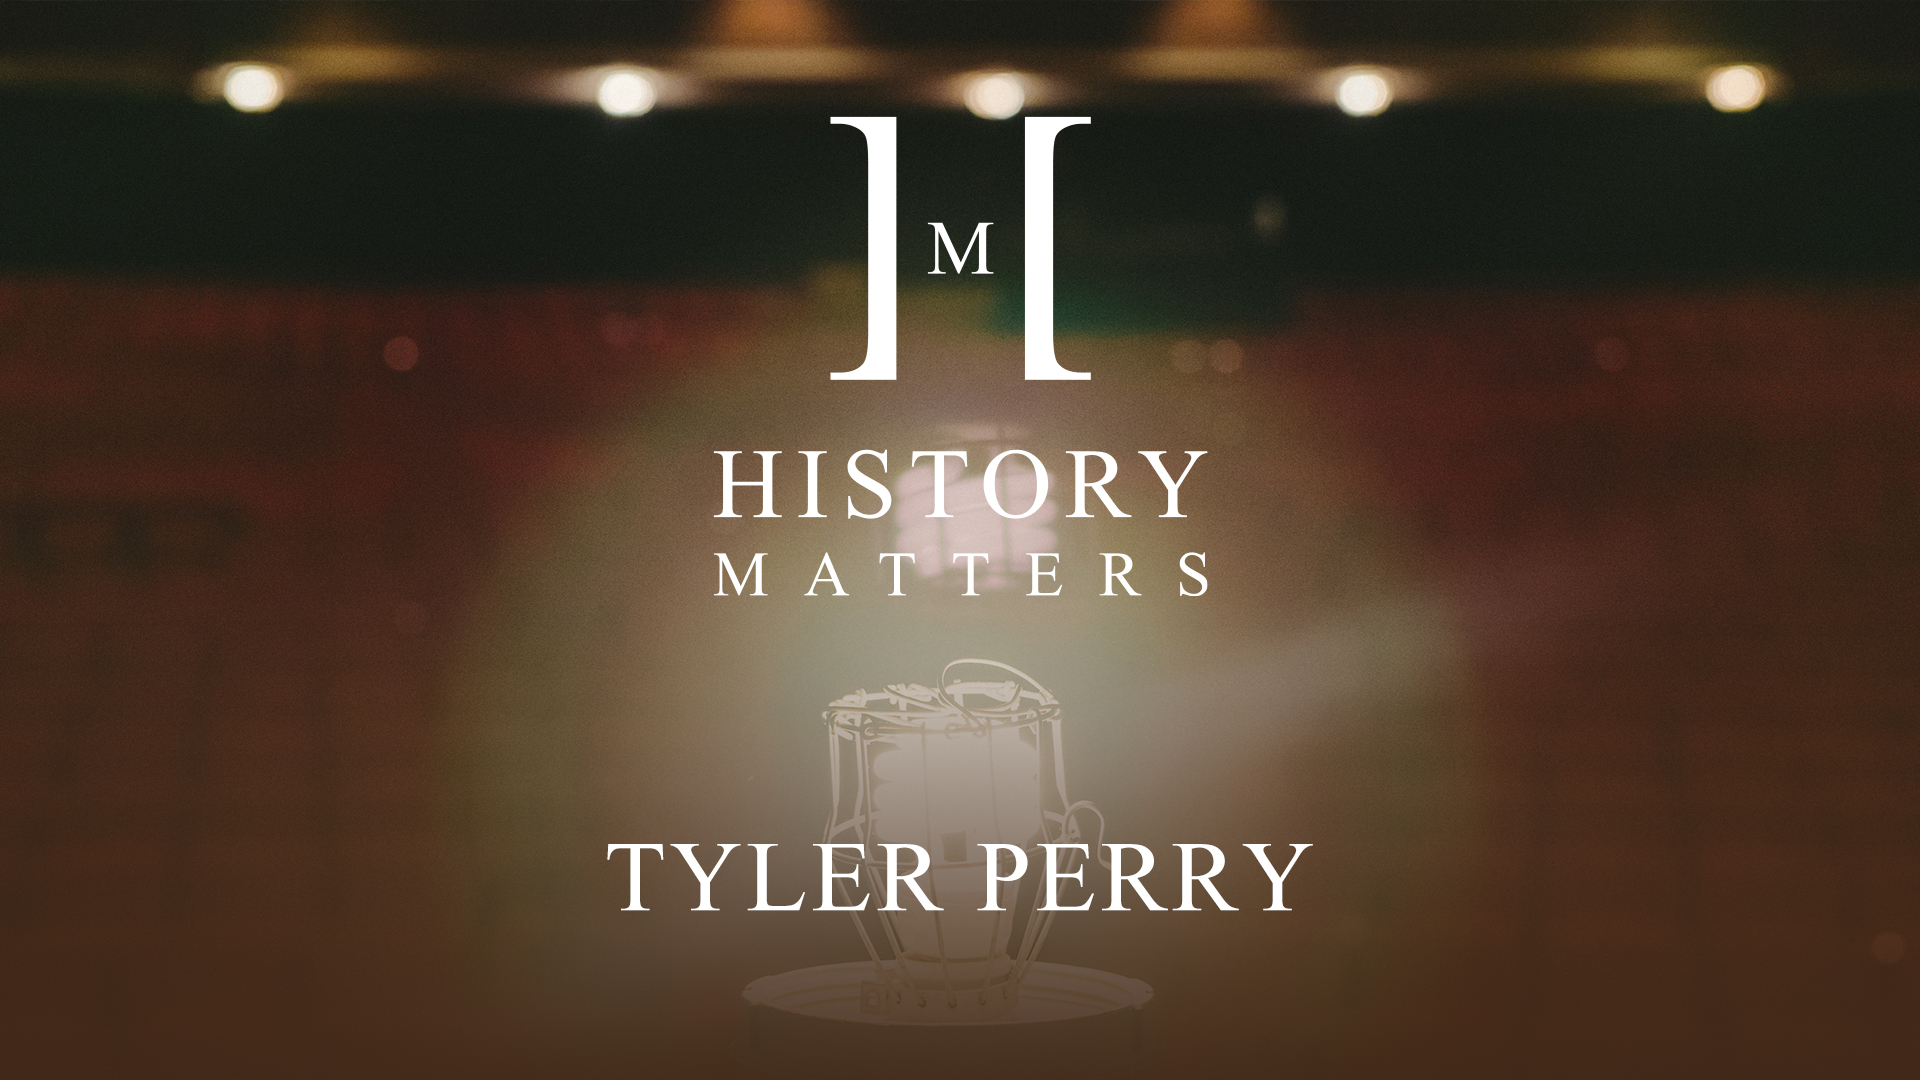 IU C&I Studios Page White History Matters Tyler Perry by Amber Fox logo with dimmed background of red theater seats